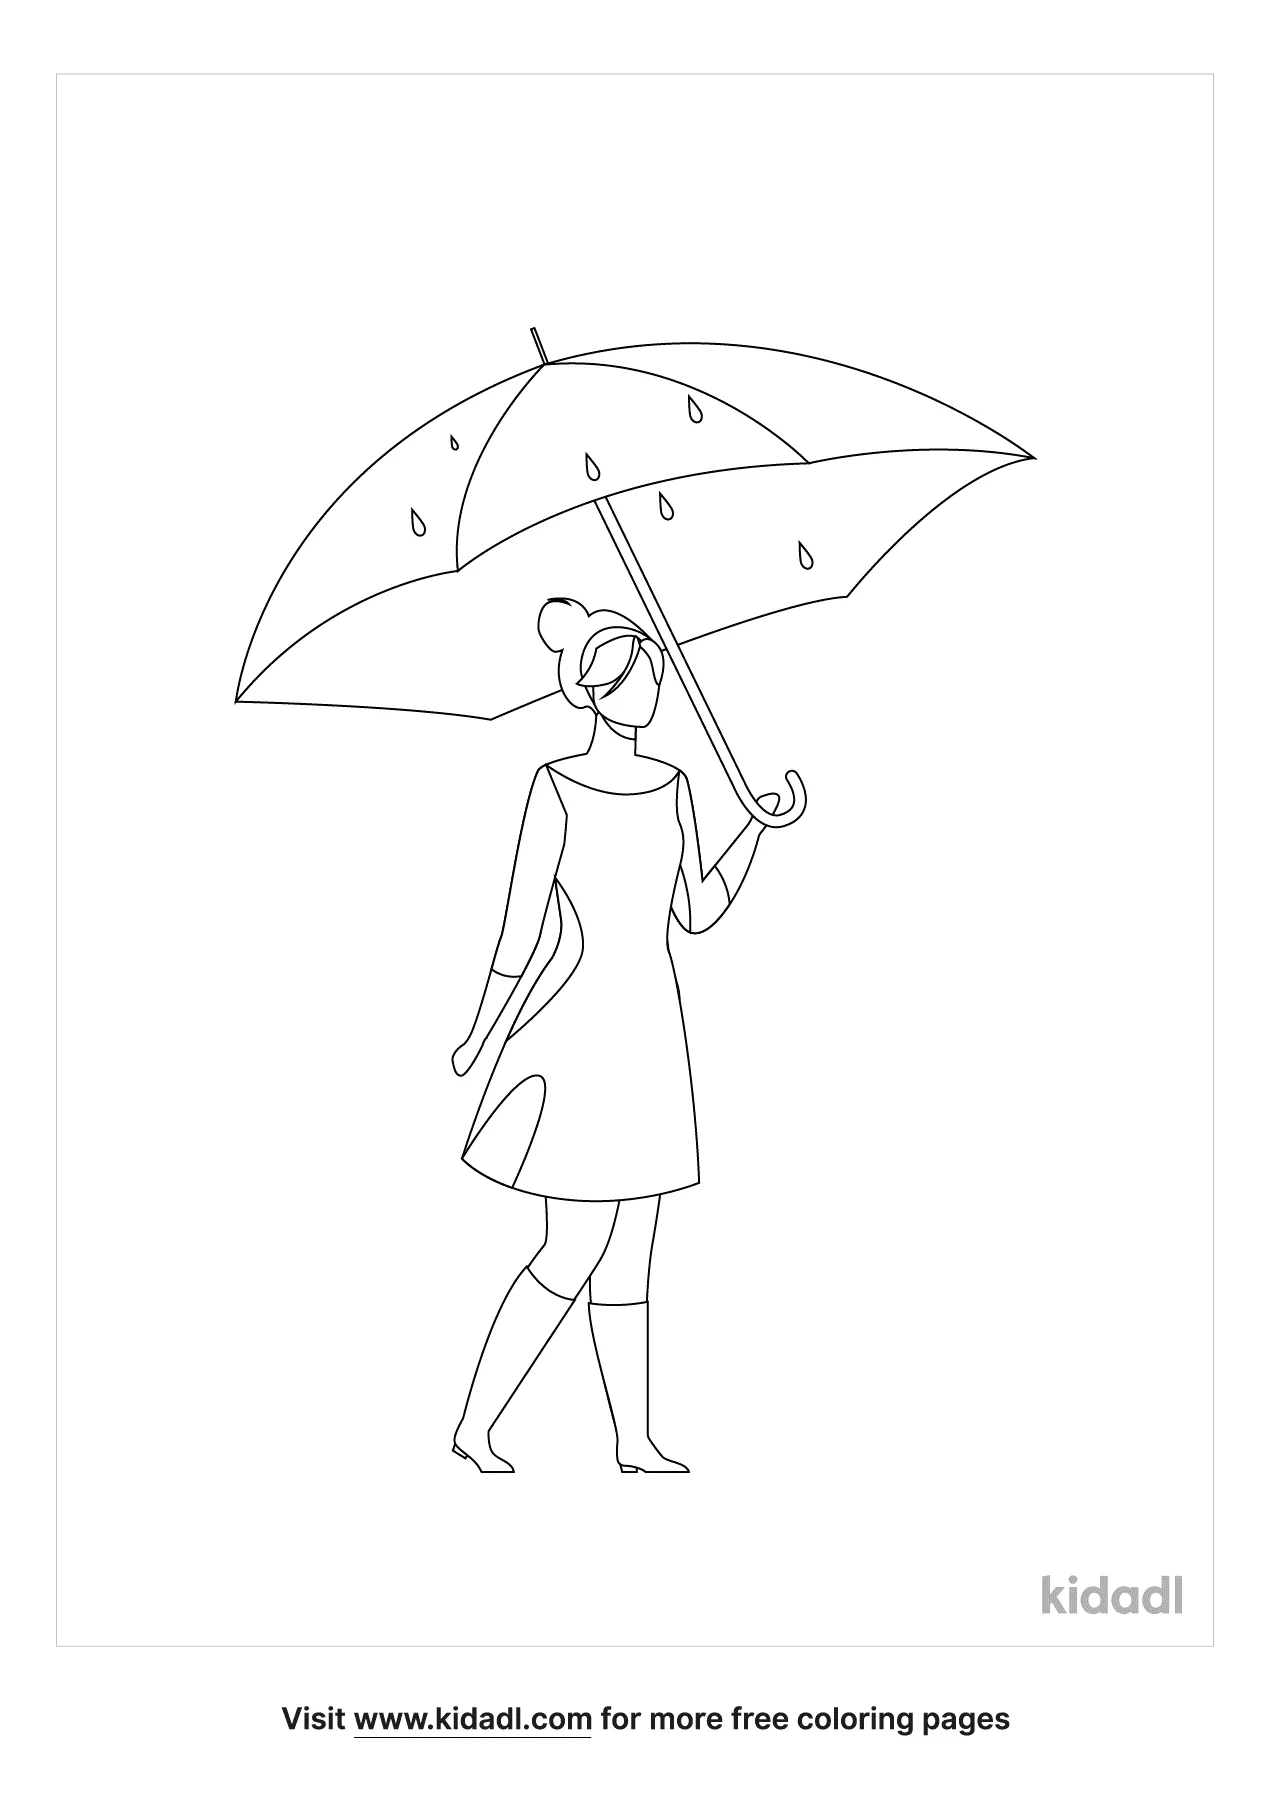 Person With Umbrella Coloring Page